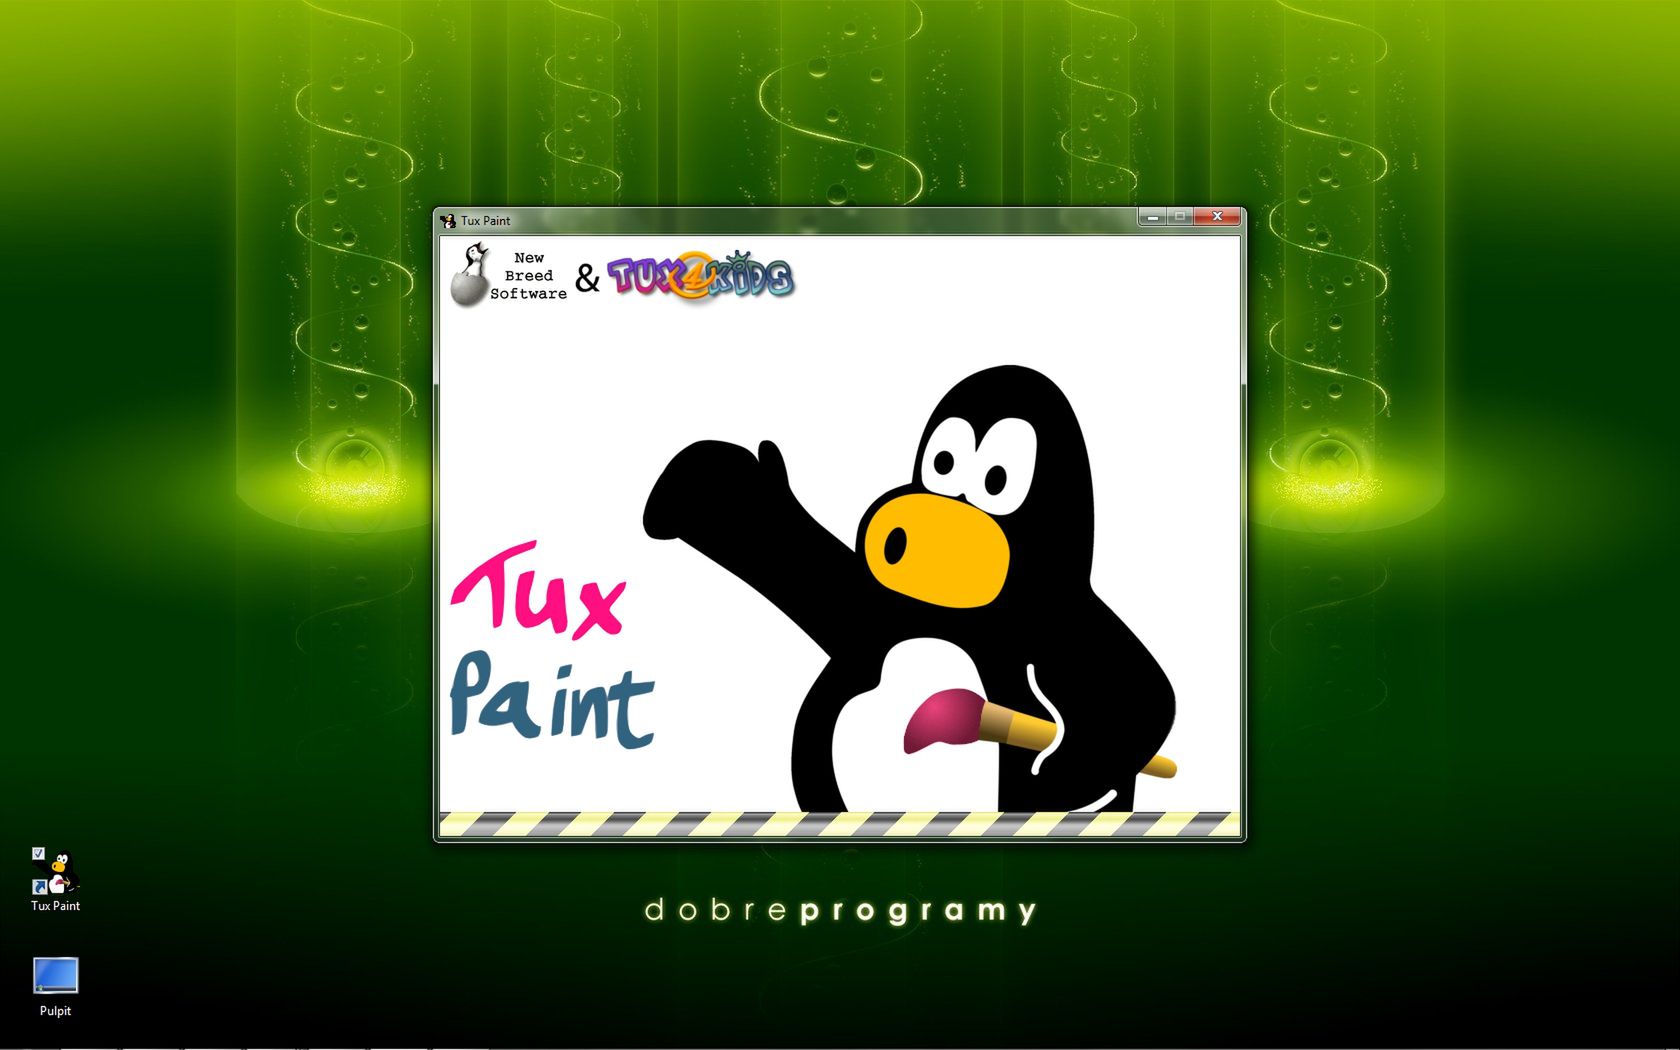 tux paint software free download for windows xp